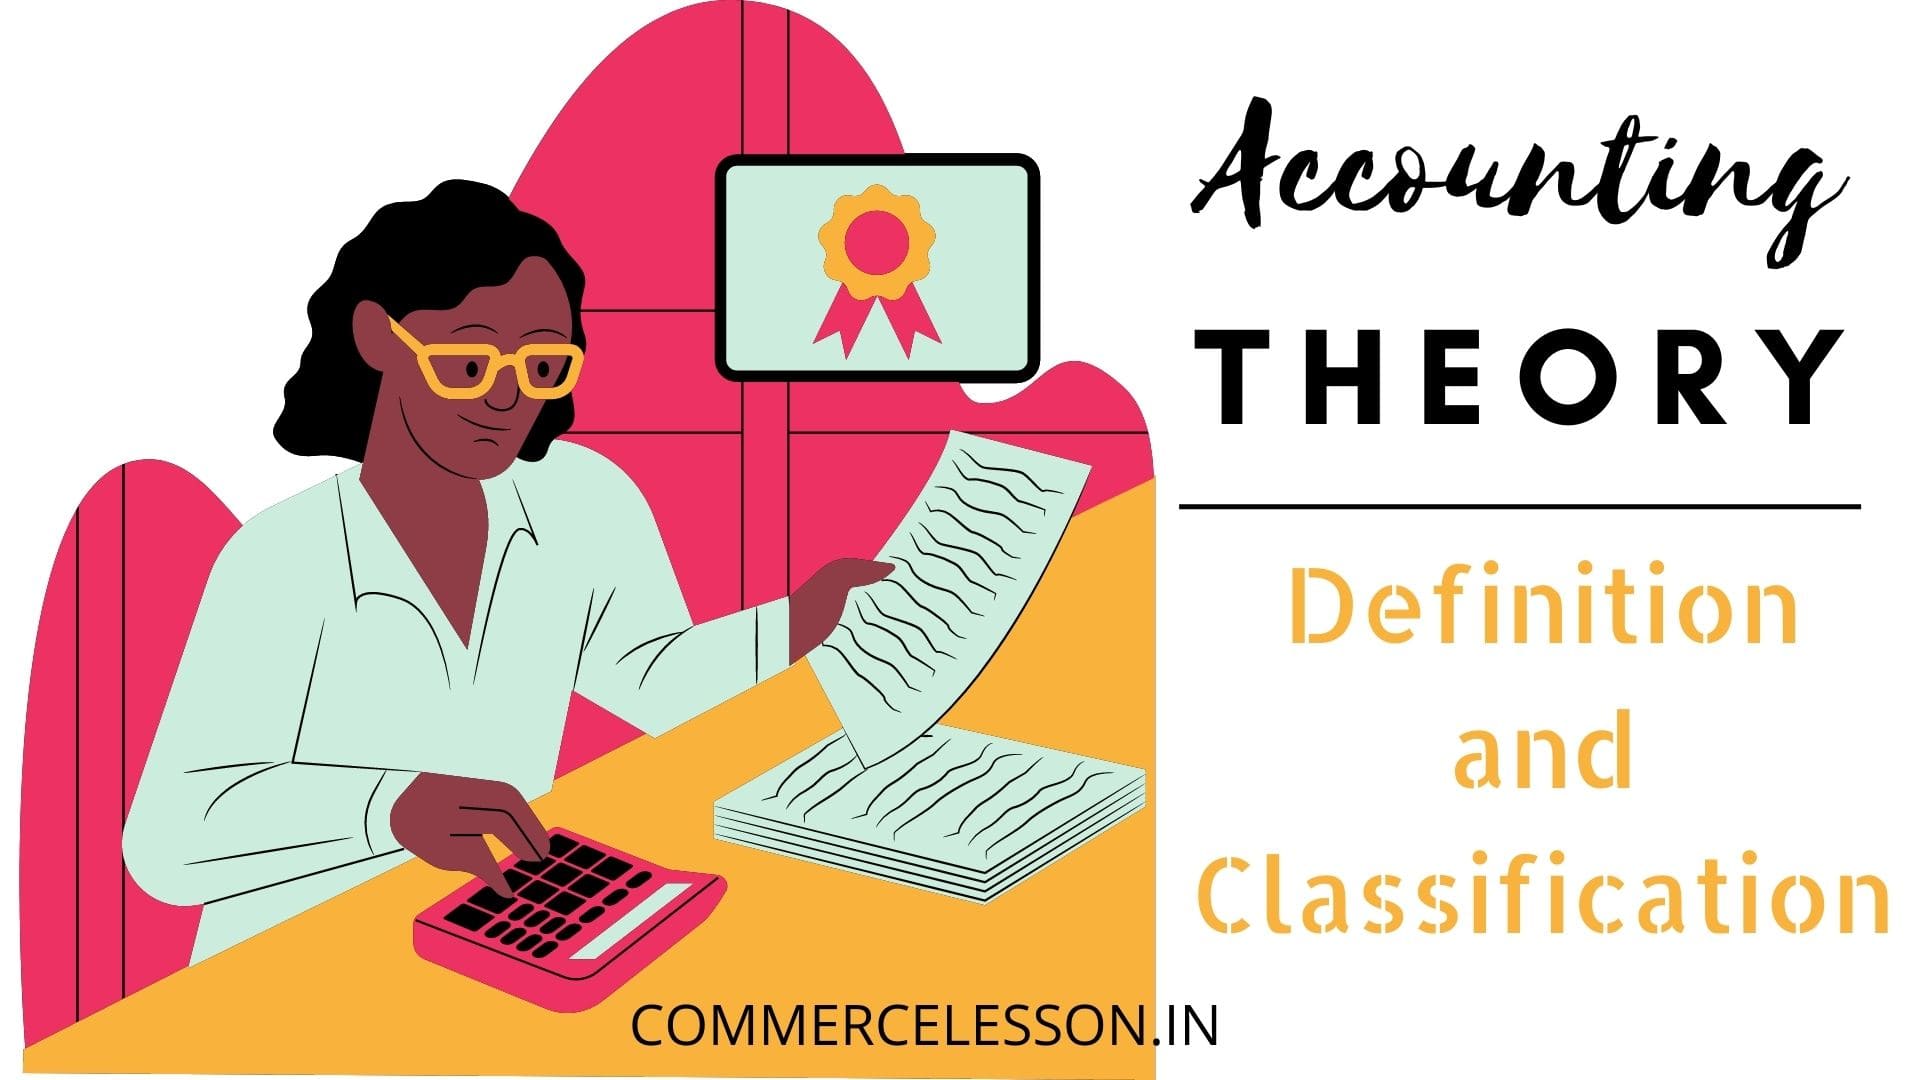 Definition and Classification of Accounting Theory